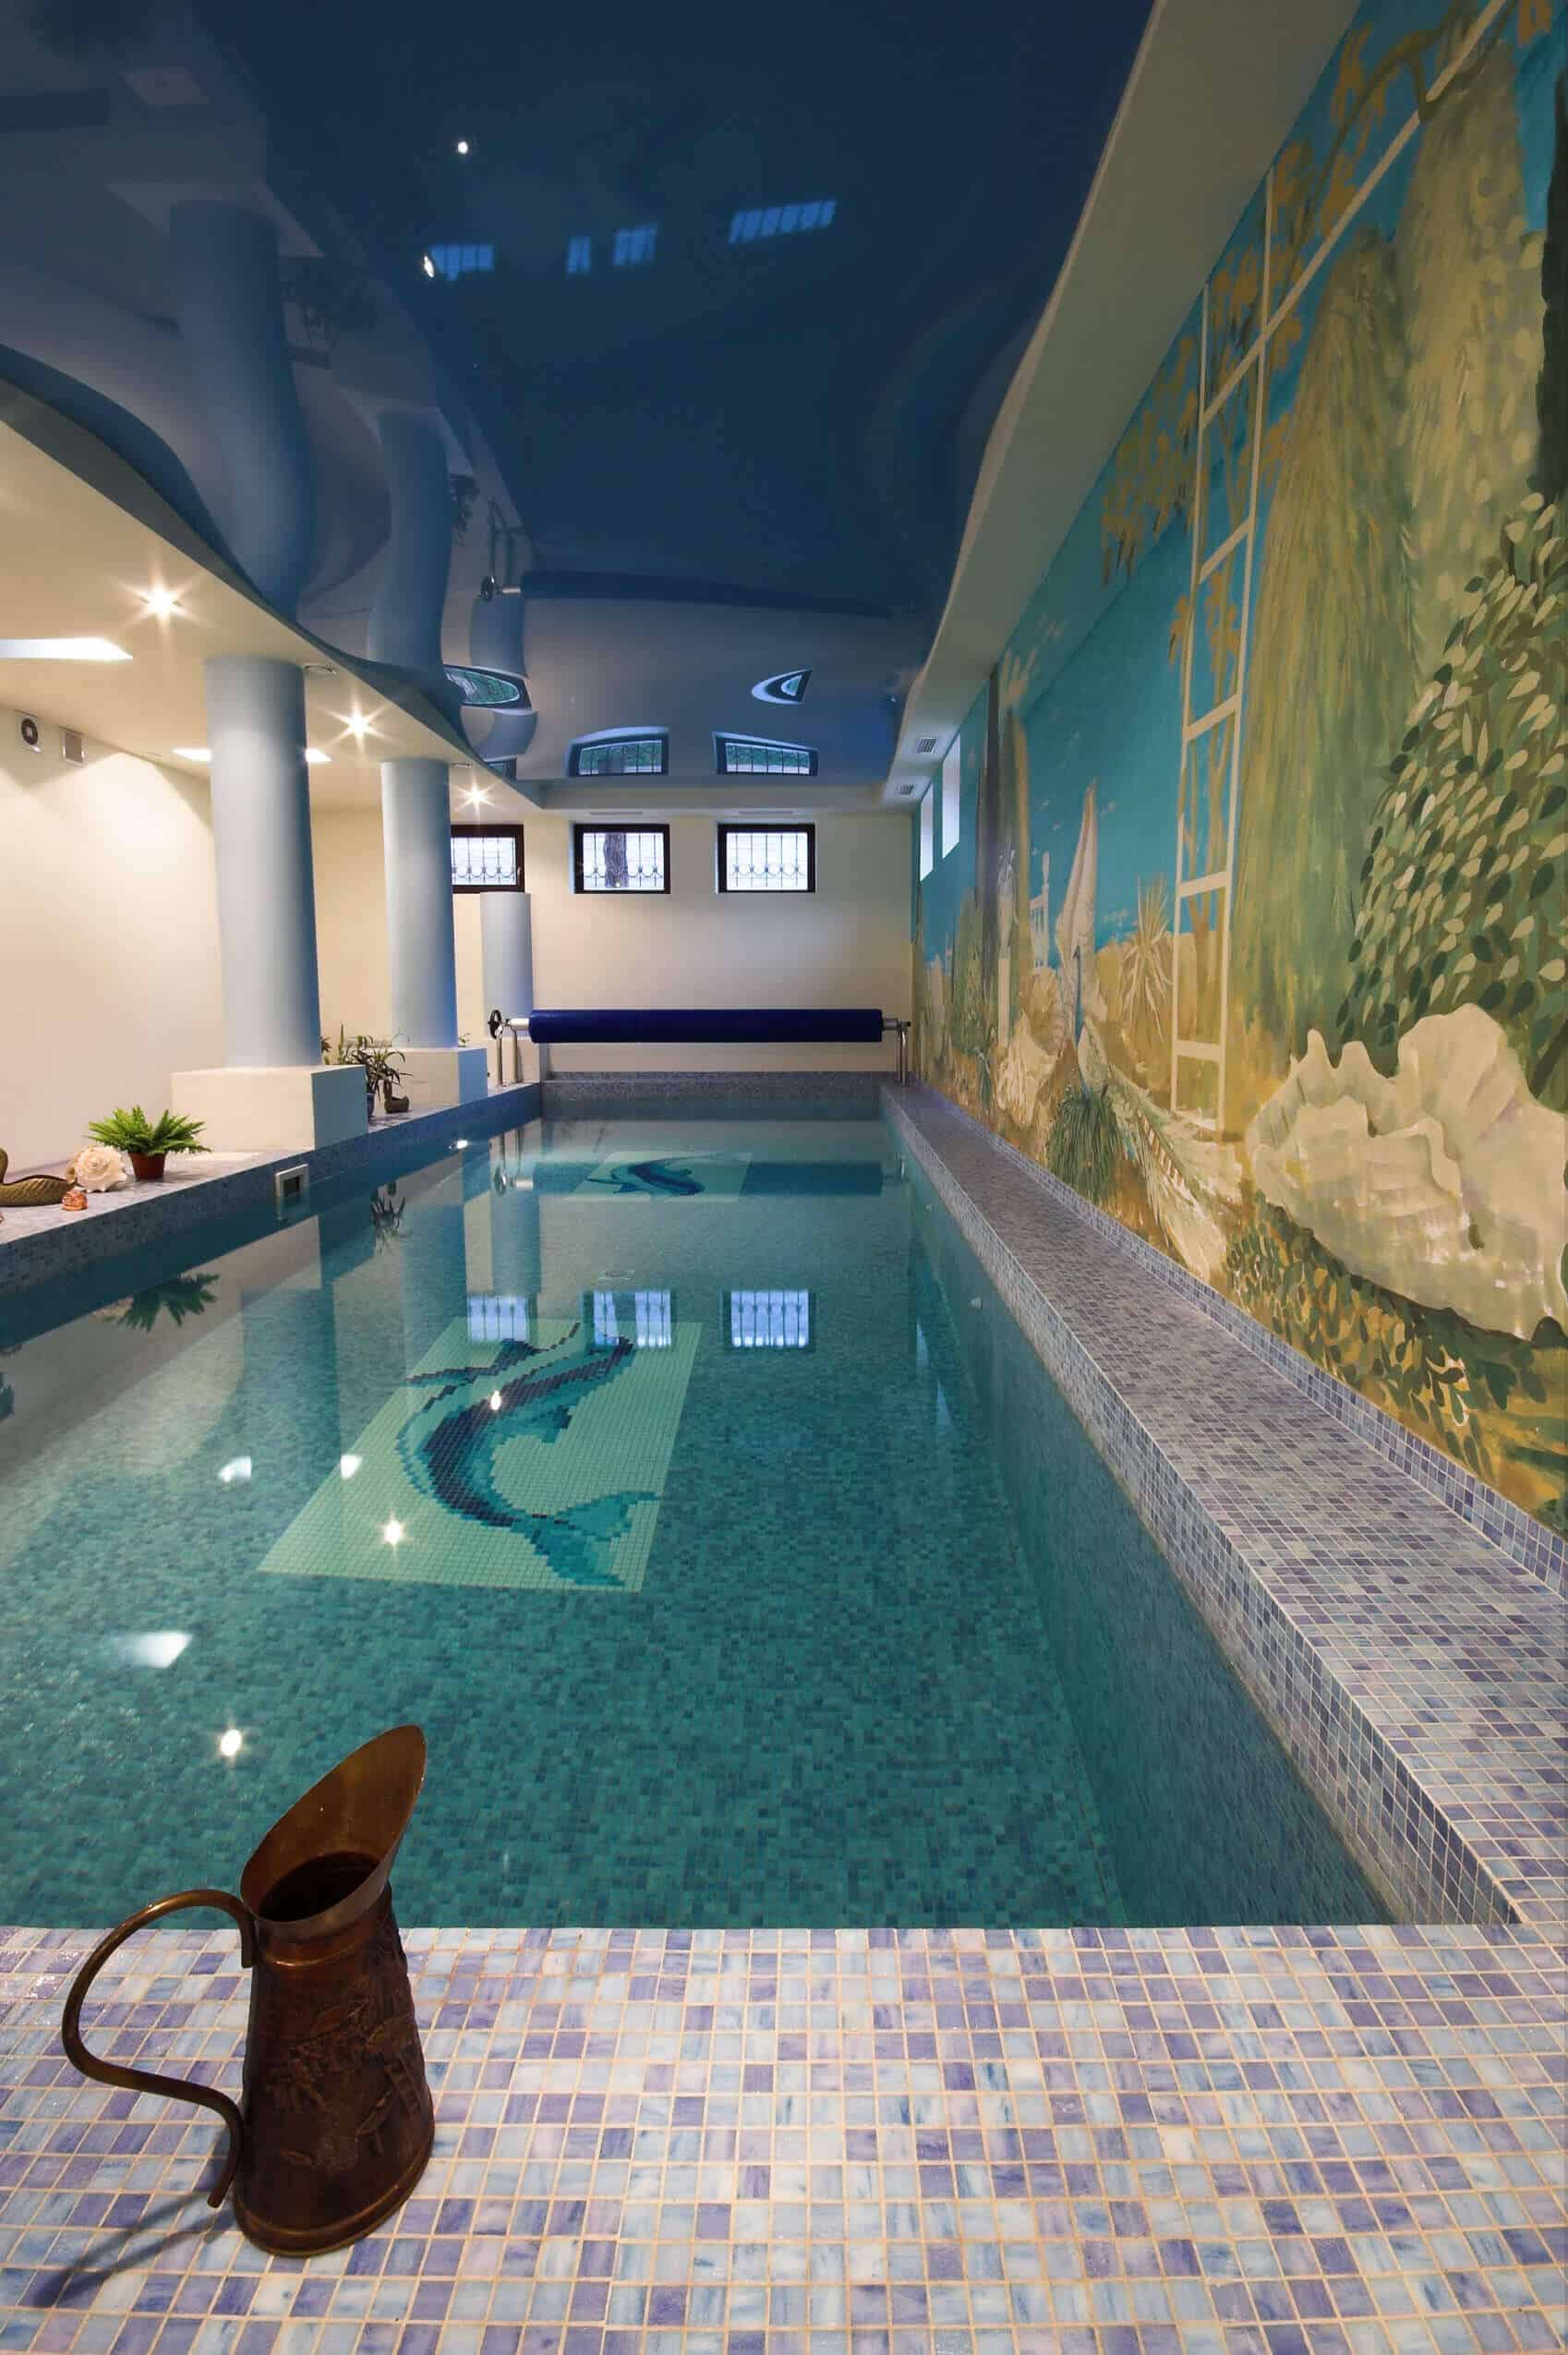 29 Ways You Can Design Your Big Indoor Swimming Pool - Page 8 Of 29